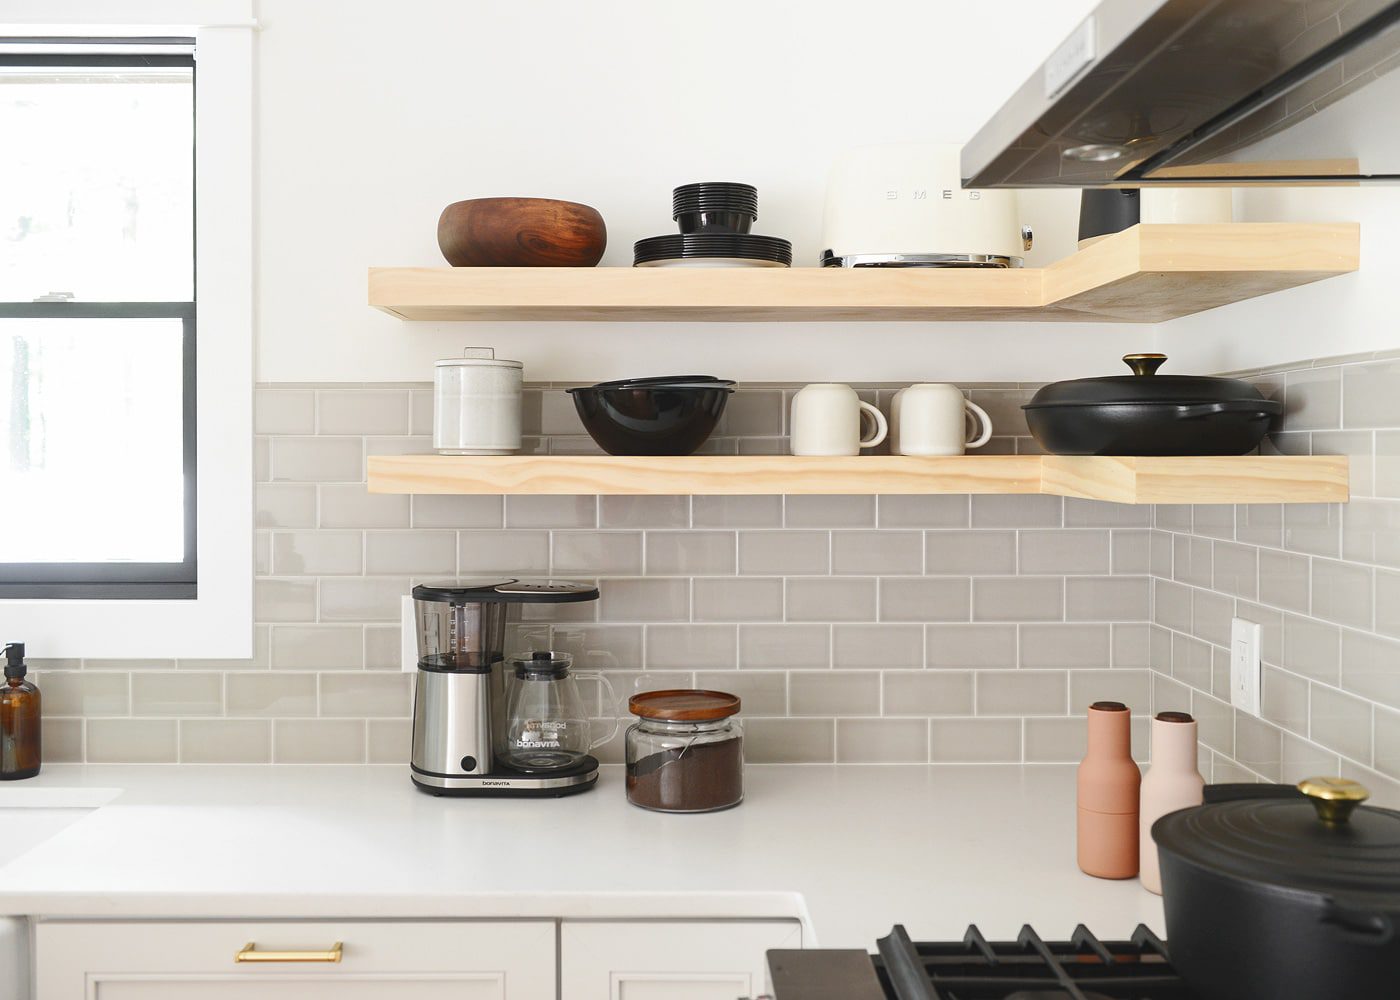 Our kitchen with greige tile, floating shelves and white countertops | The Weekender: My Skin care Routine, a Podcast to Love and Our Queen Anne Home - Yellow Brick Home